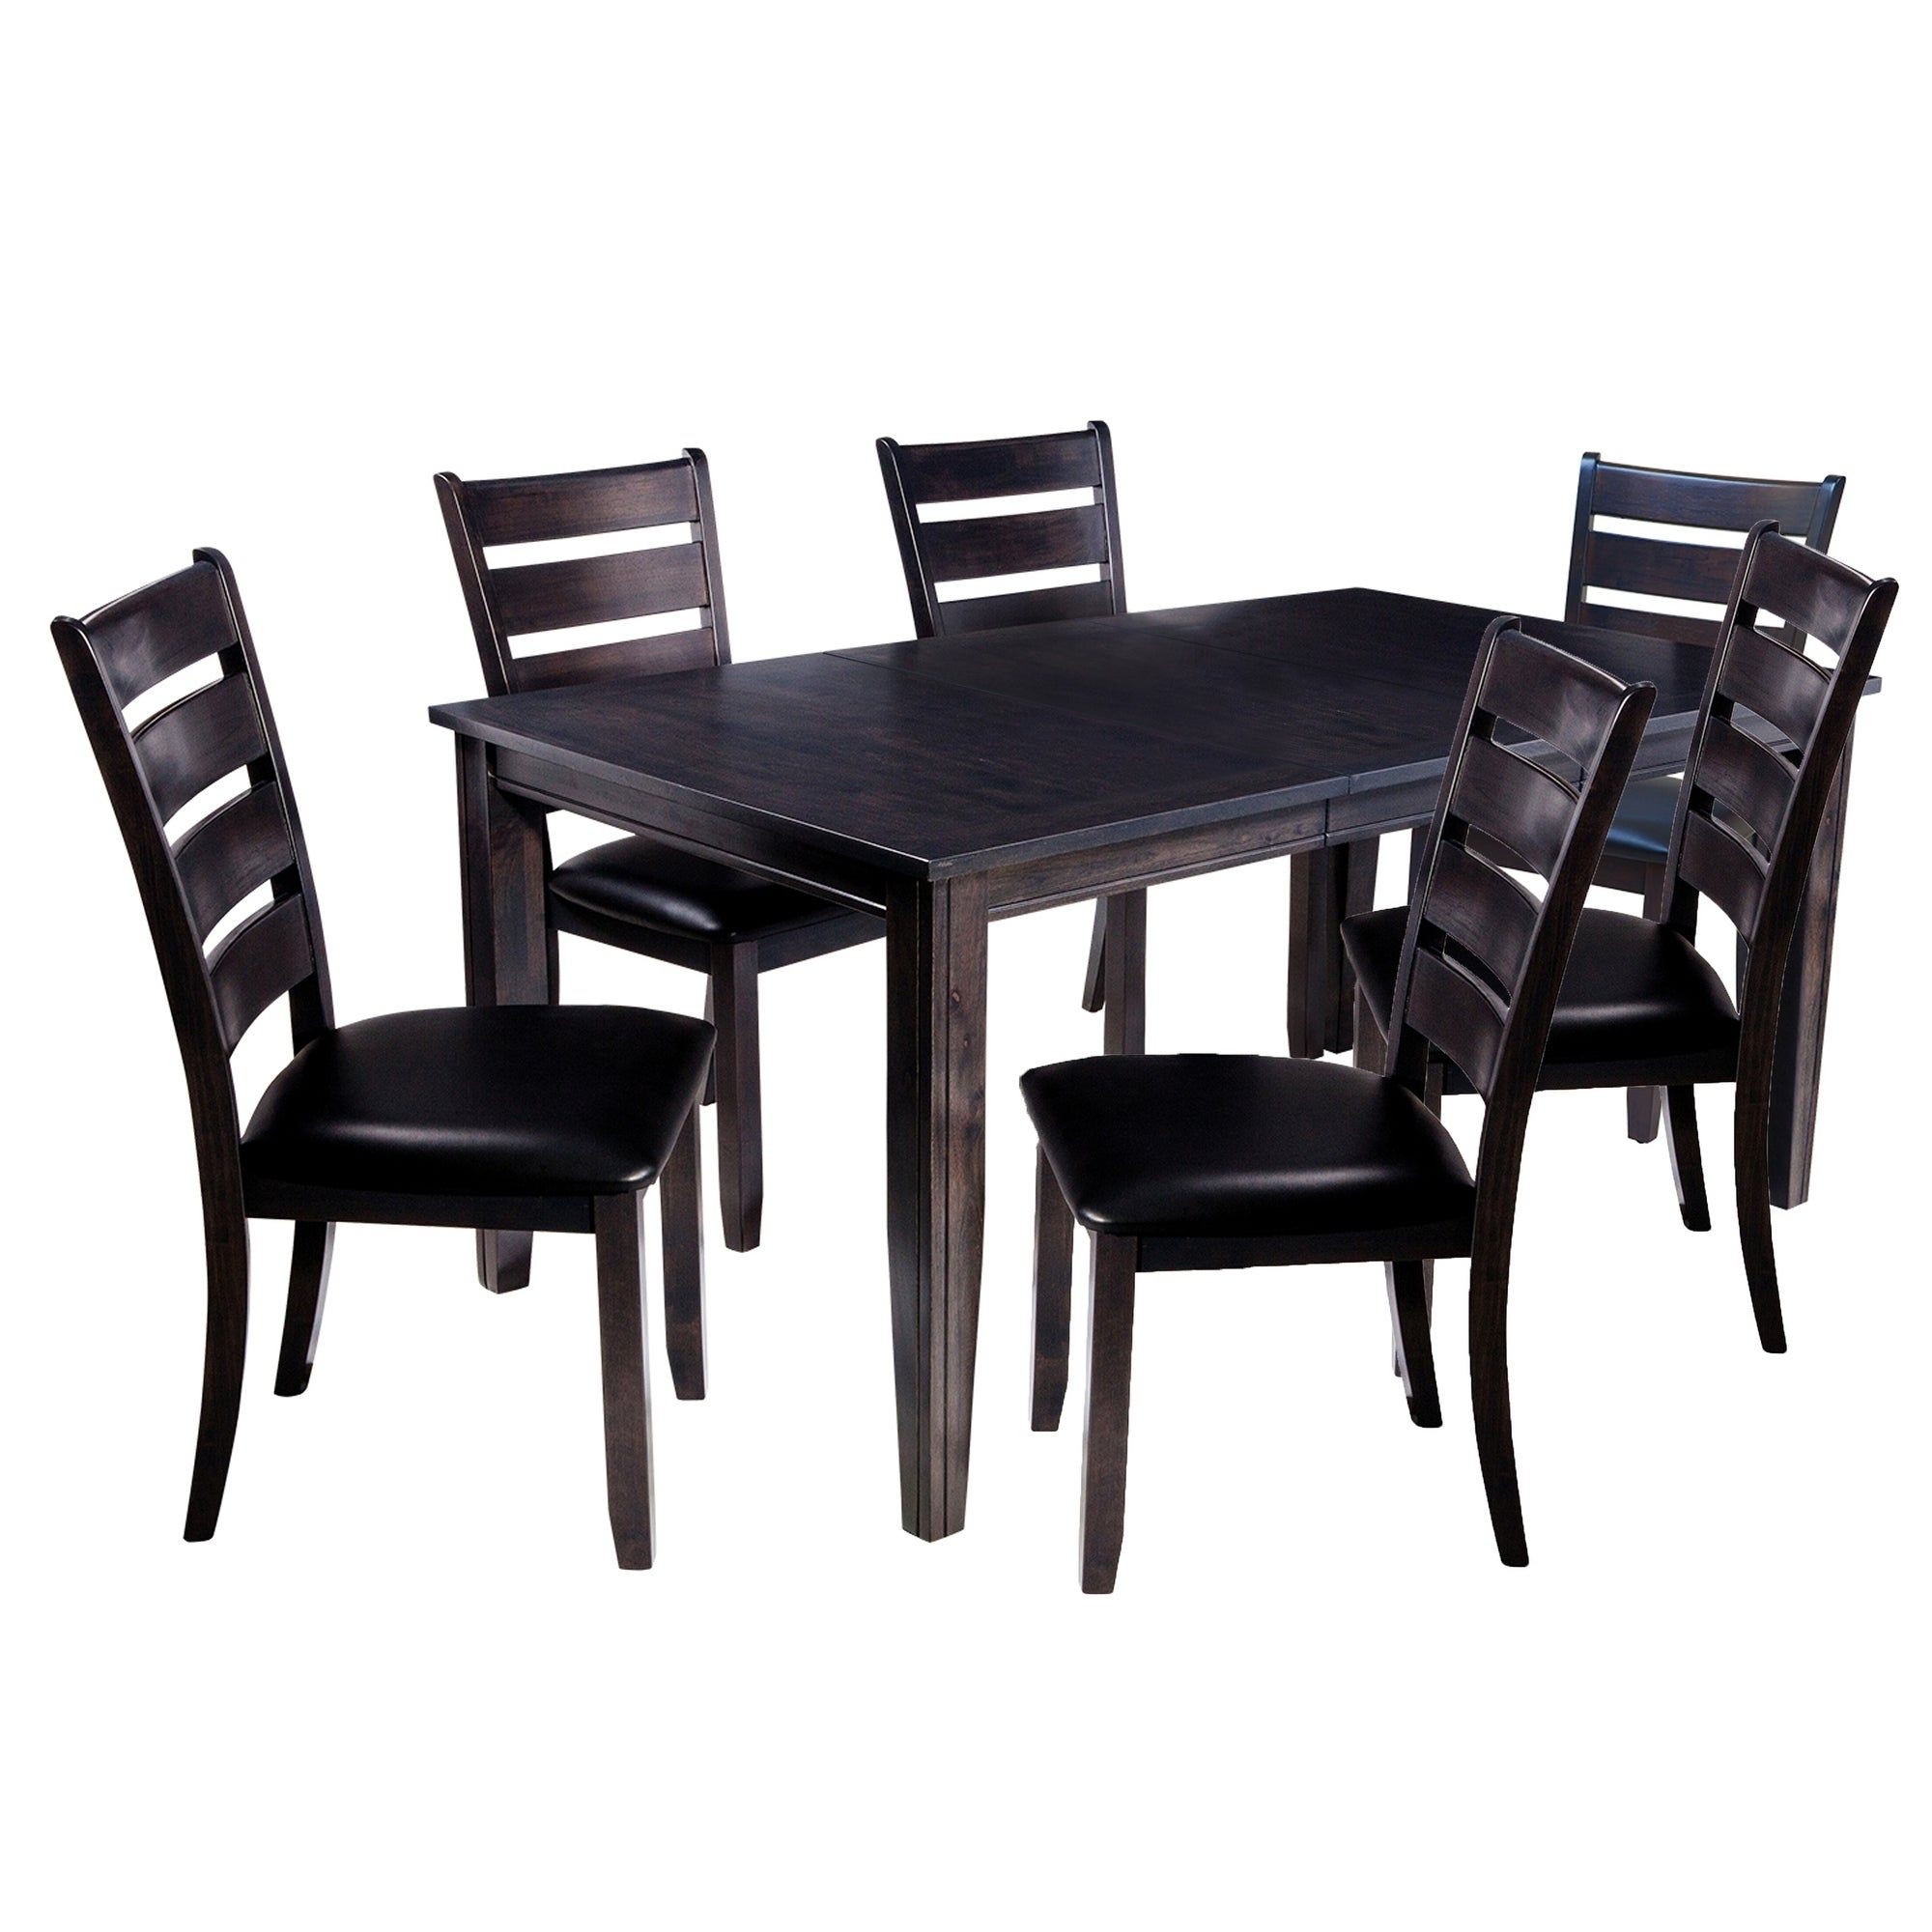 Adan 5 Piece Solid Wood Dining Sets (set Of 5) Intended For 2019 Shop 7 Piece Solid Wood Dining Set "aden", Modern Kitchen Table Set (Photo 11 of 25)